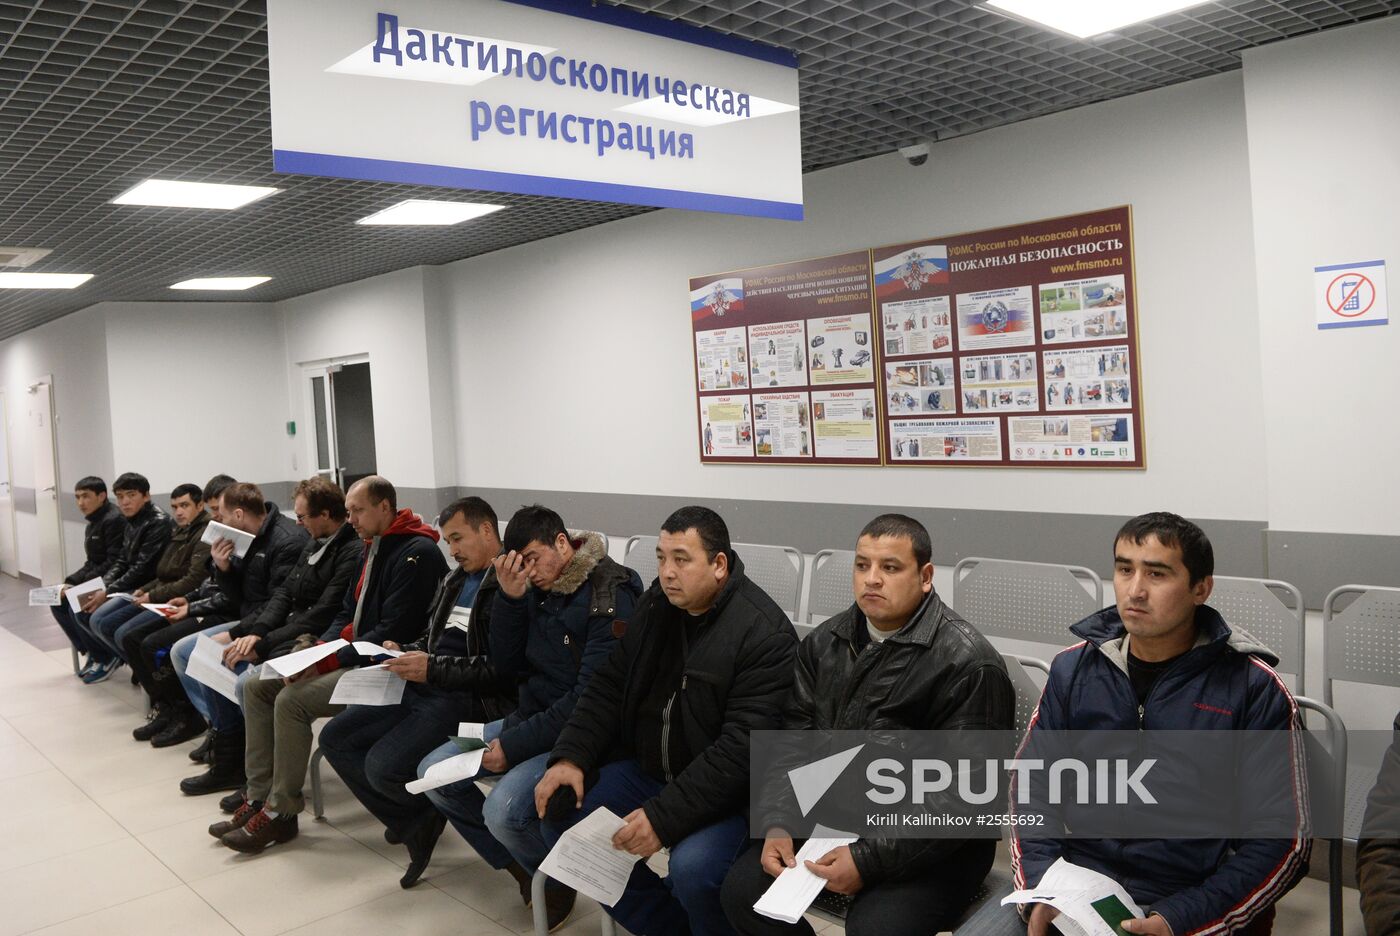 Issue of first patents at Uniform Migration Center, Moscow Region